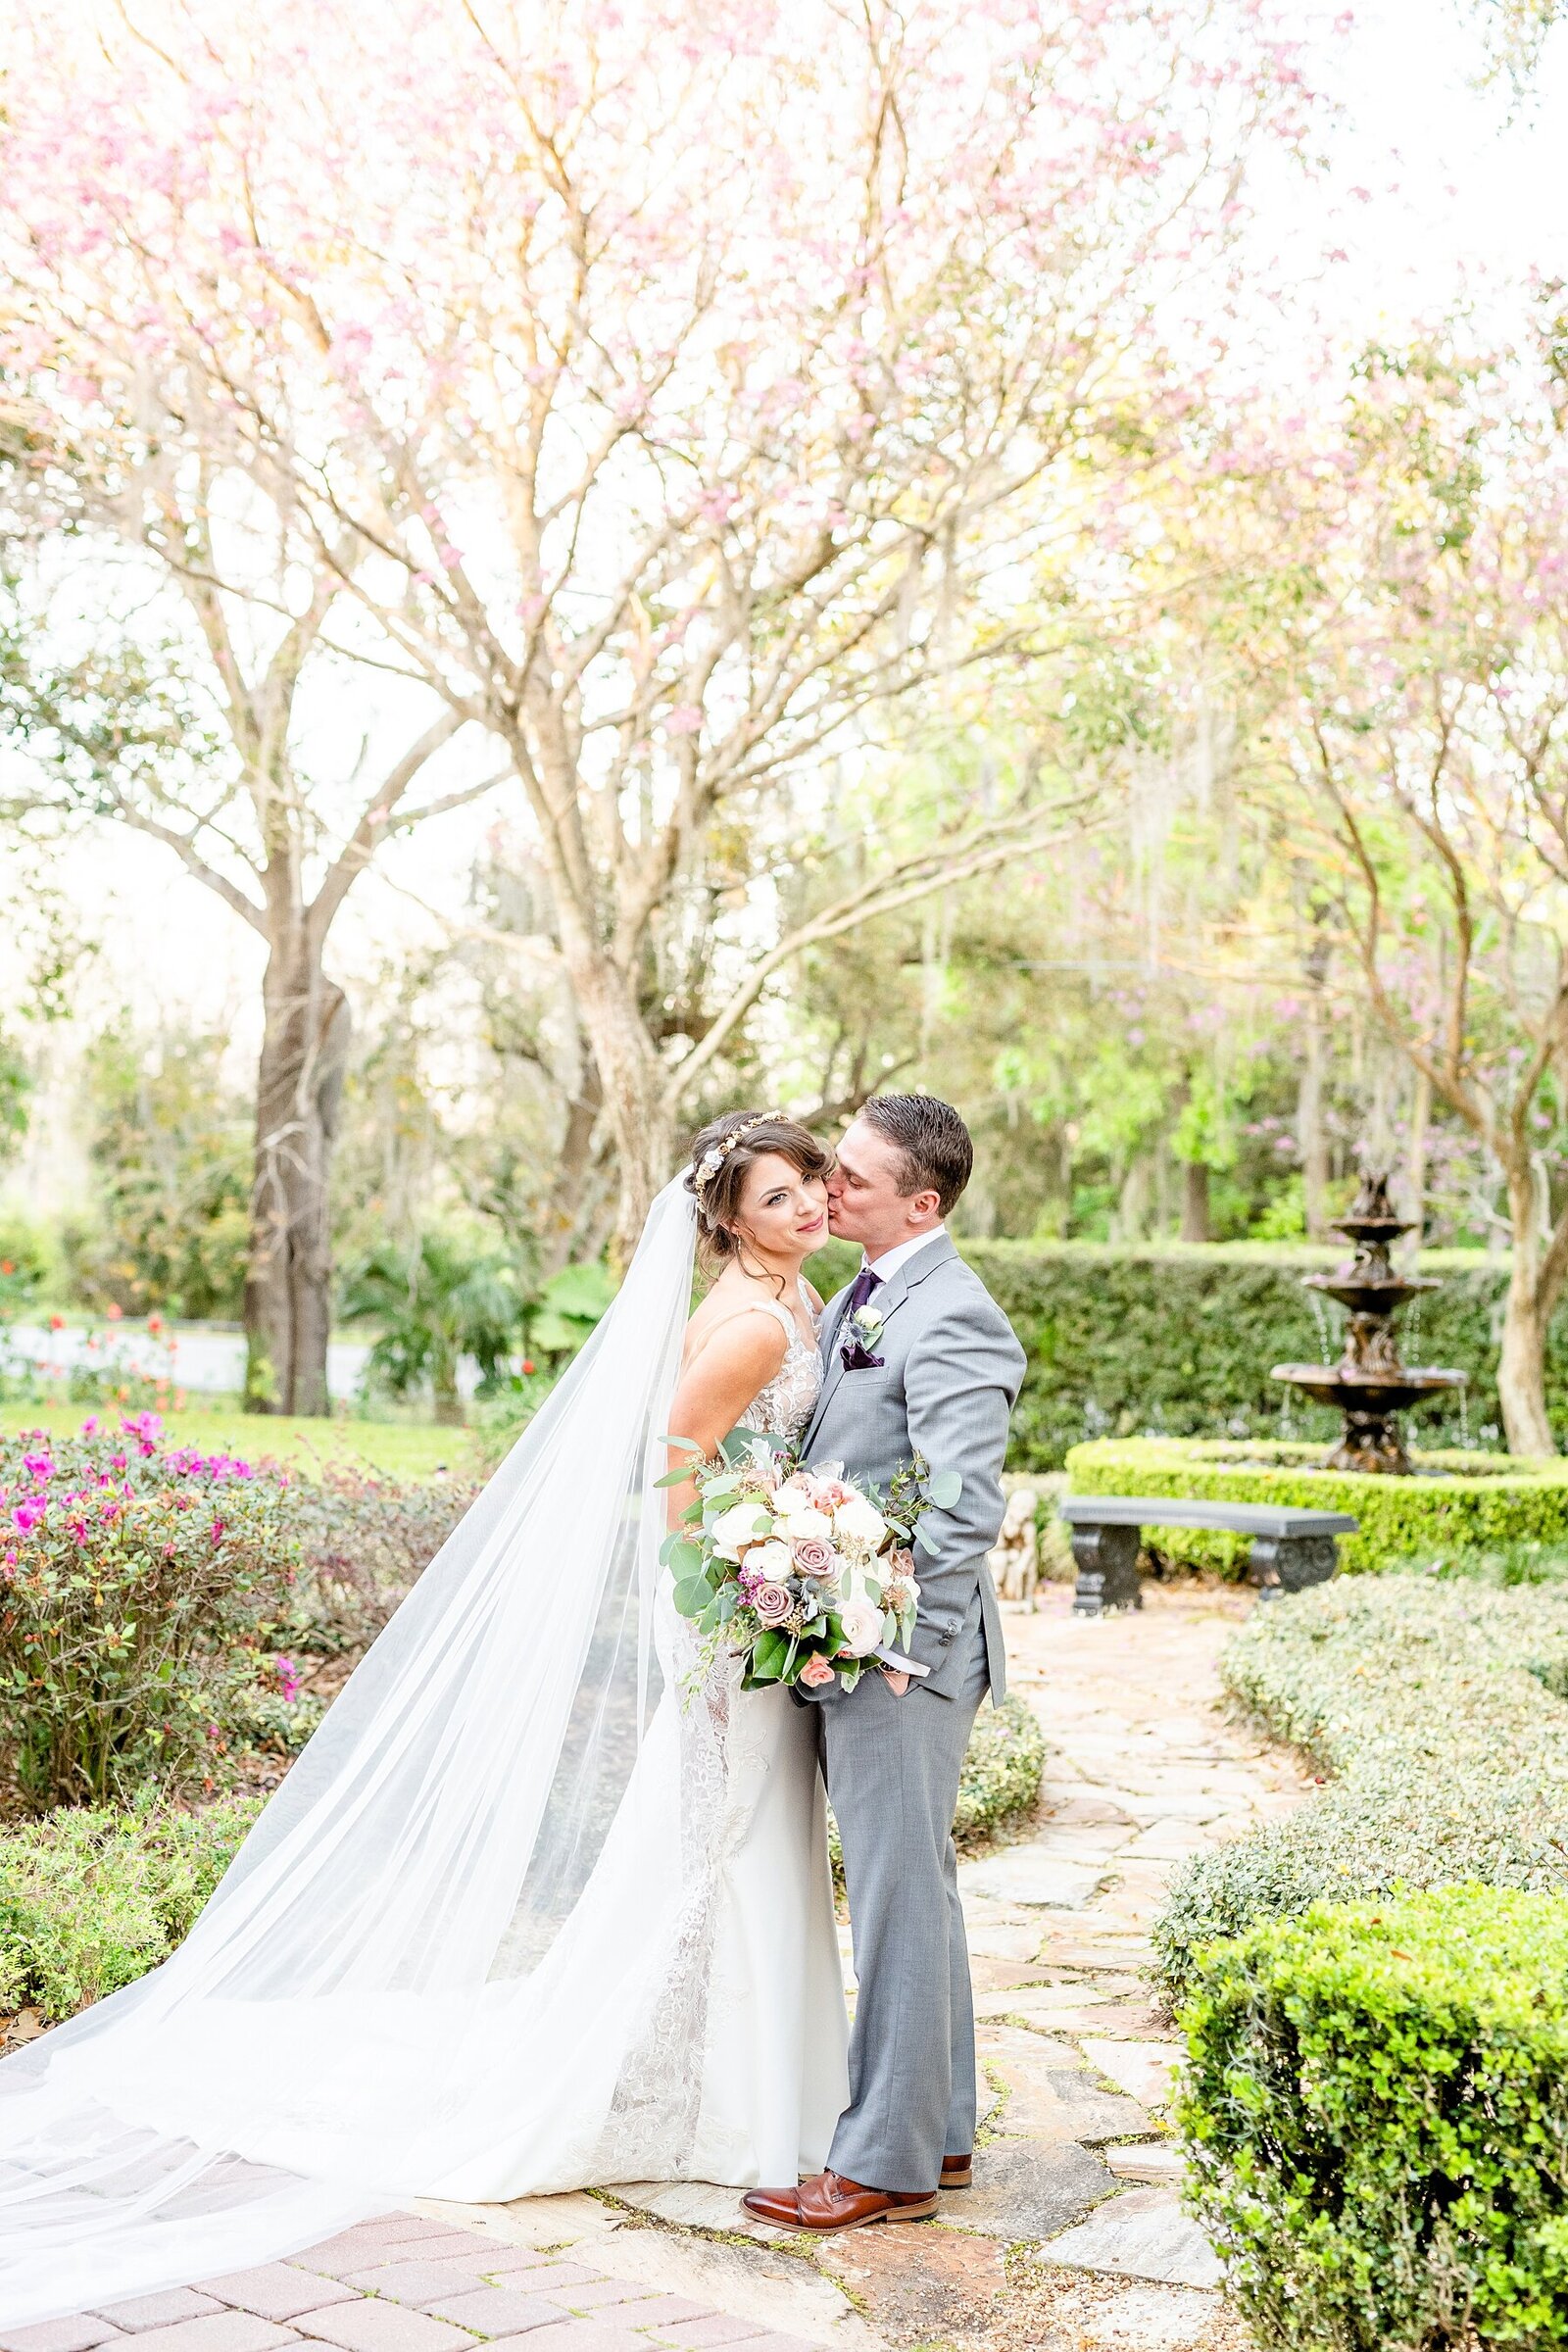 Wedding Day Portraits | Town Manor | Chynna Pacheco Photography